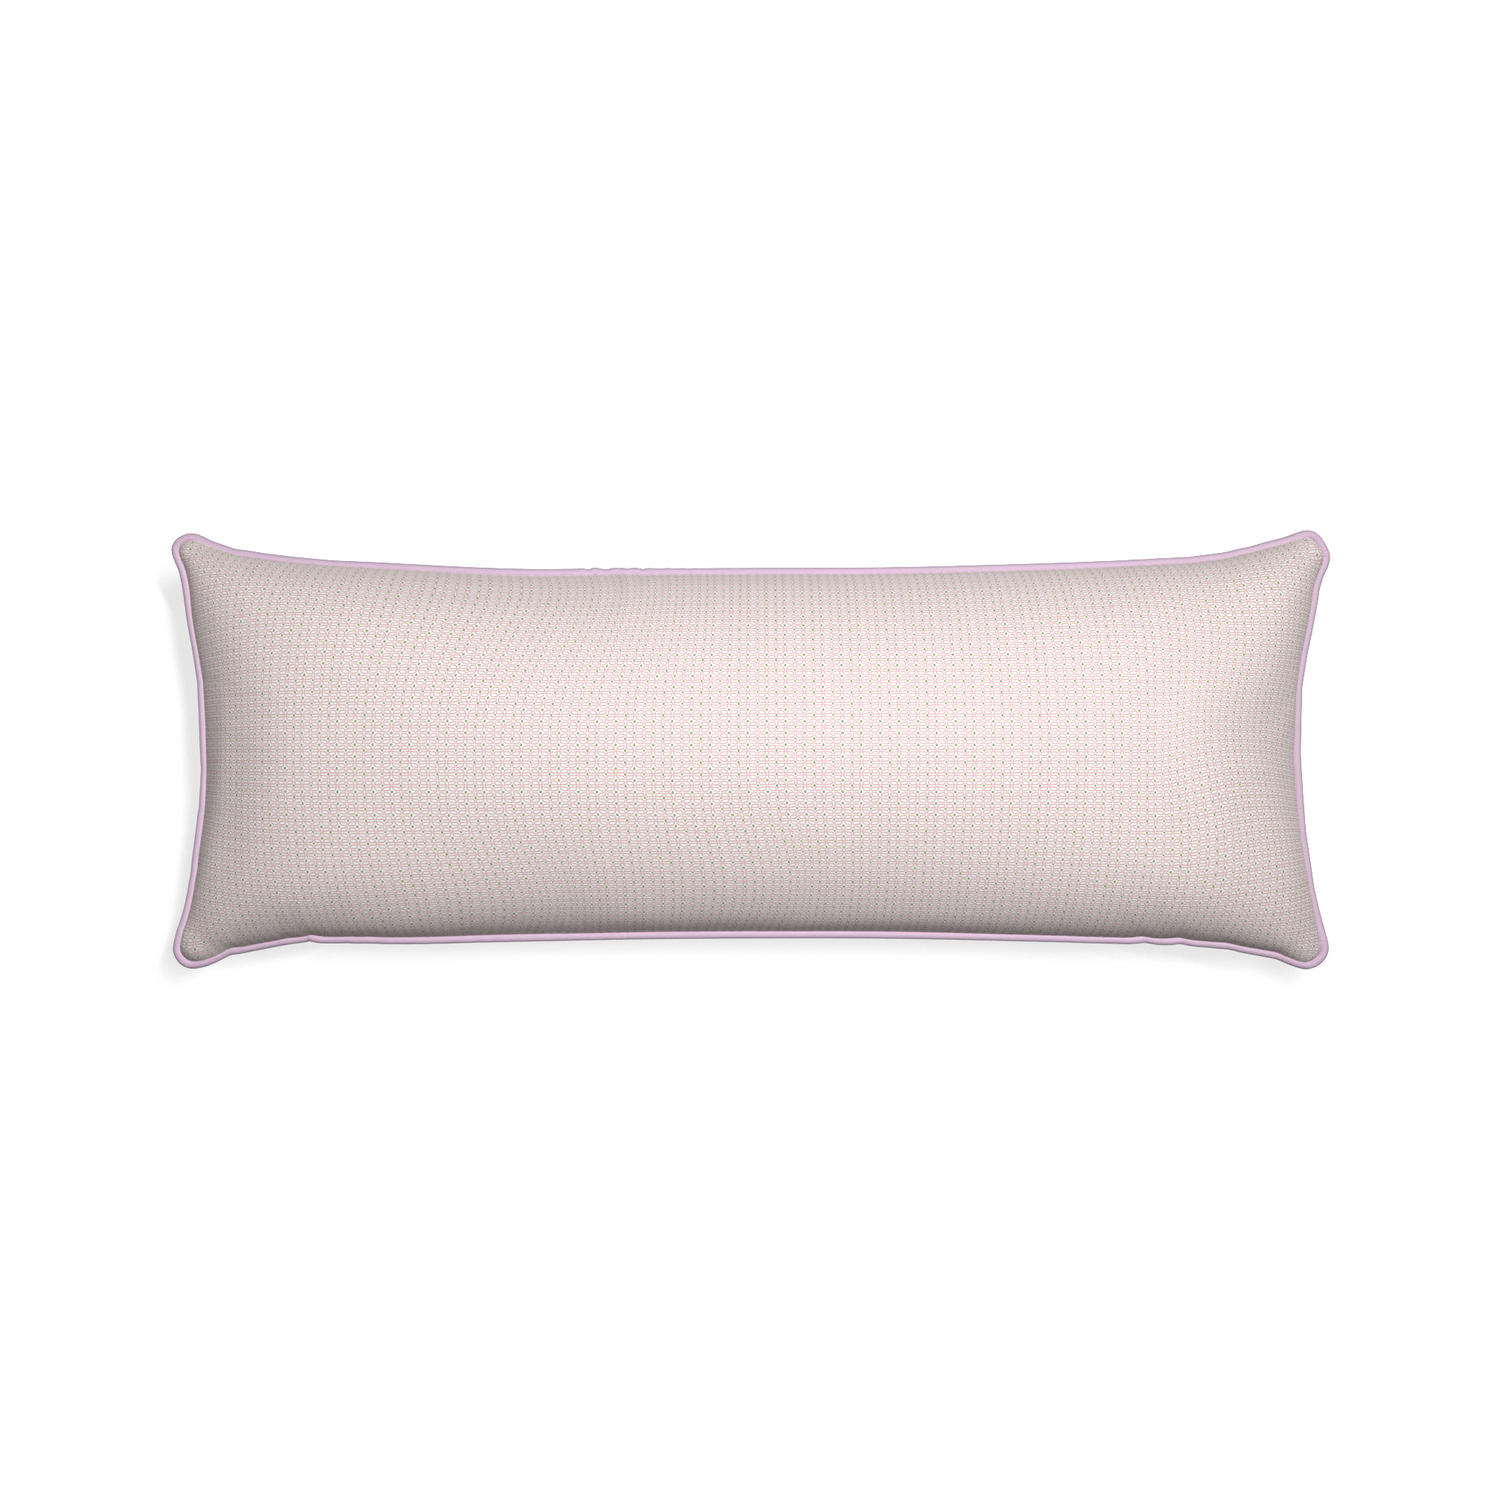 Xl-lumbar loomi pink custom pink geometricpillow with l piping on white background